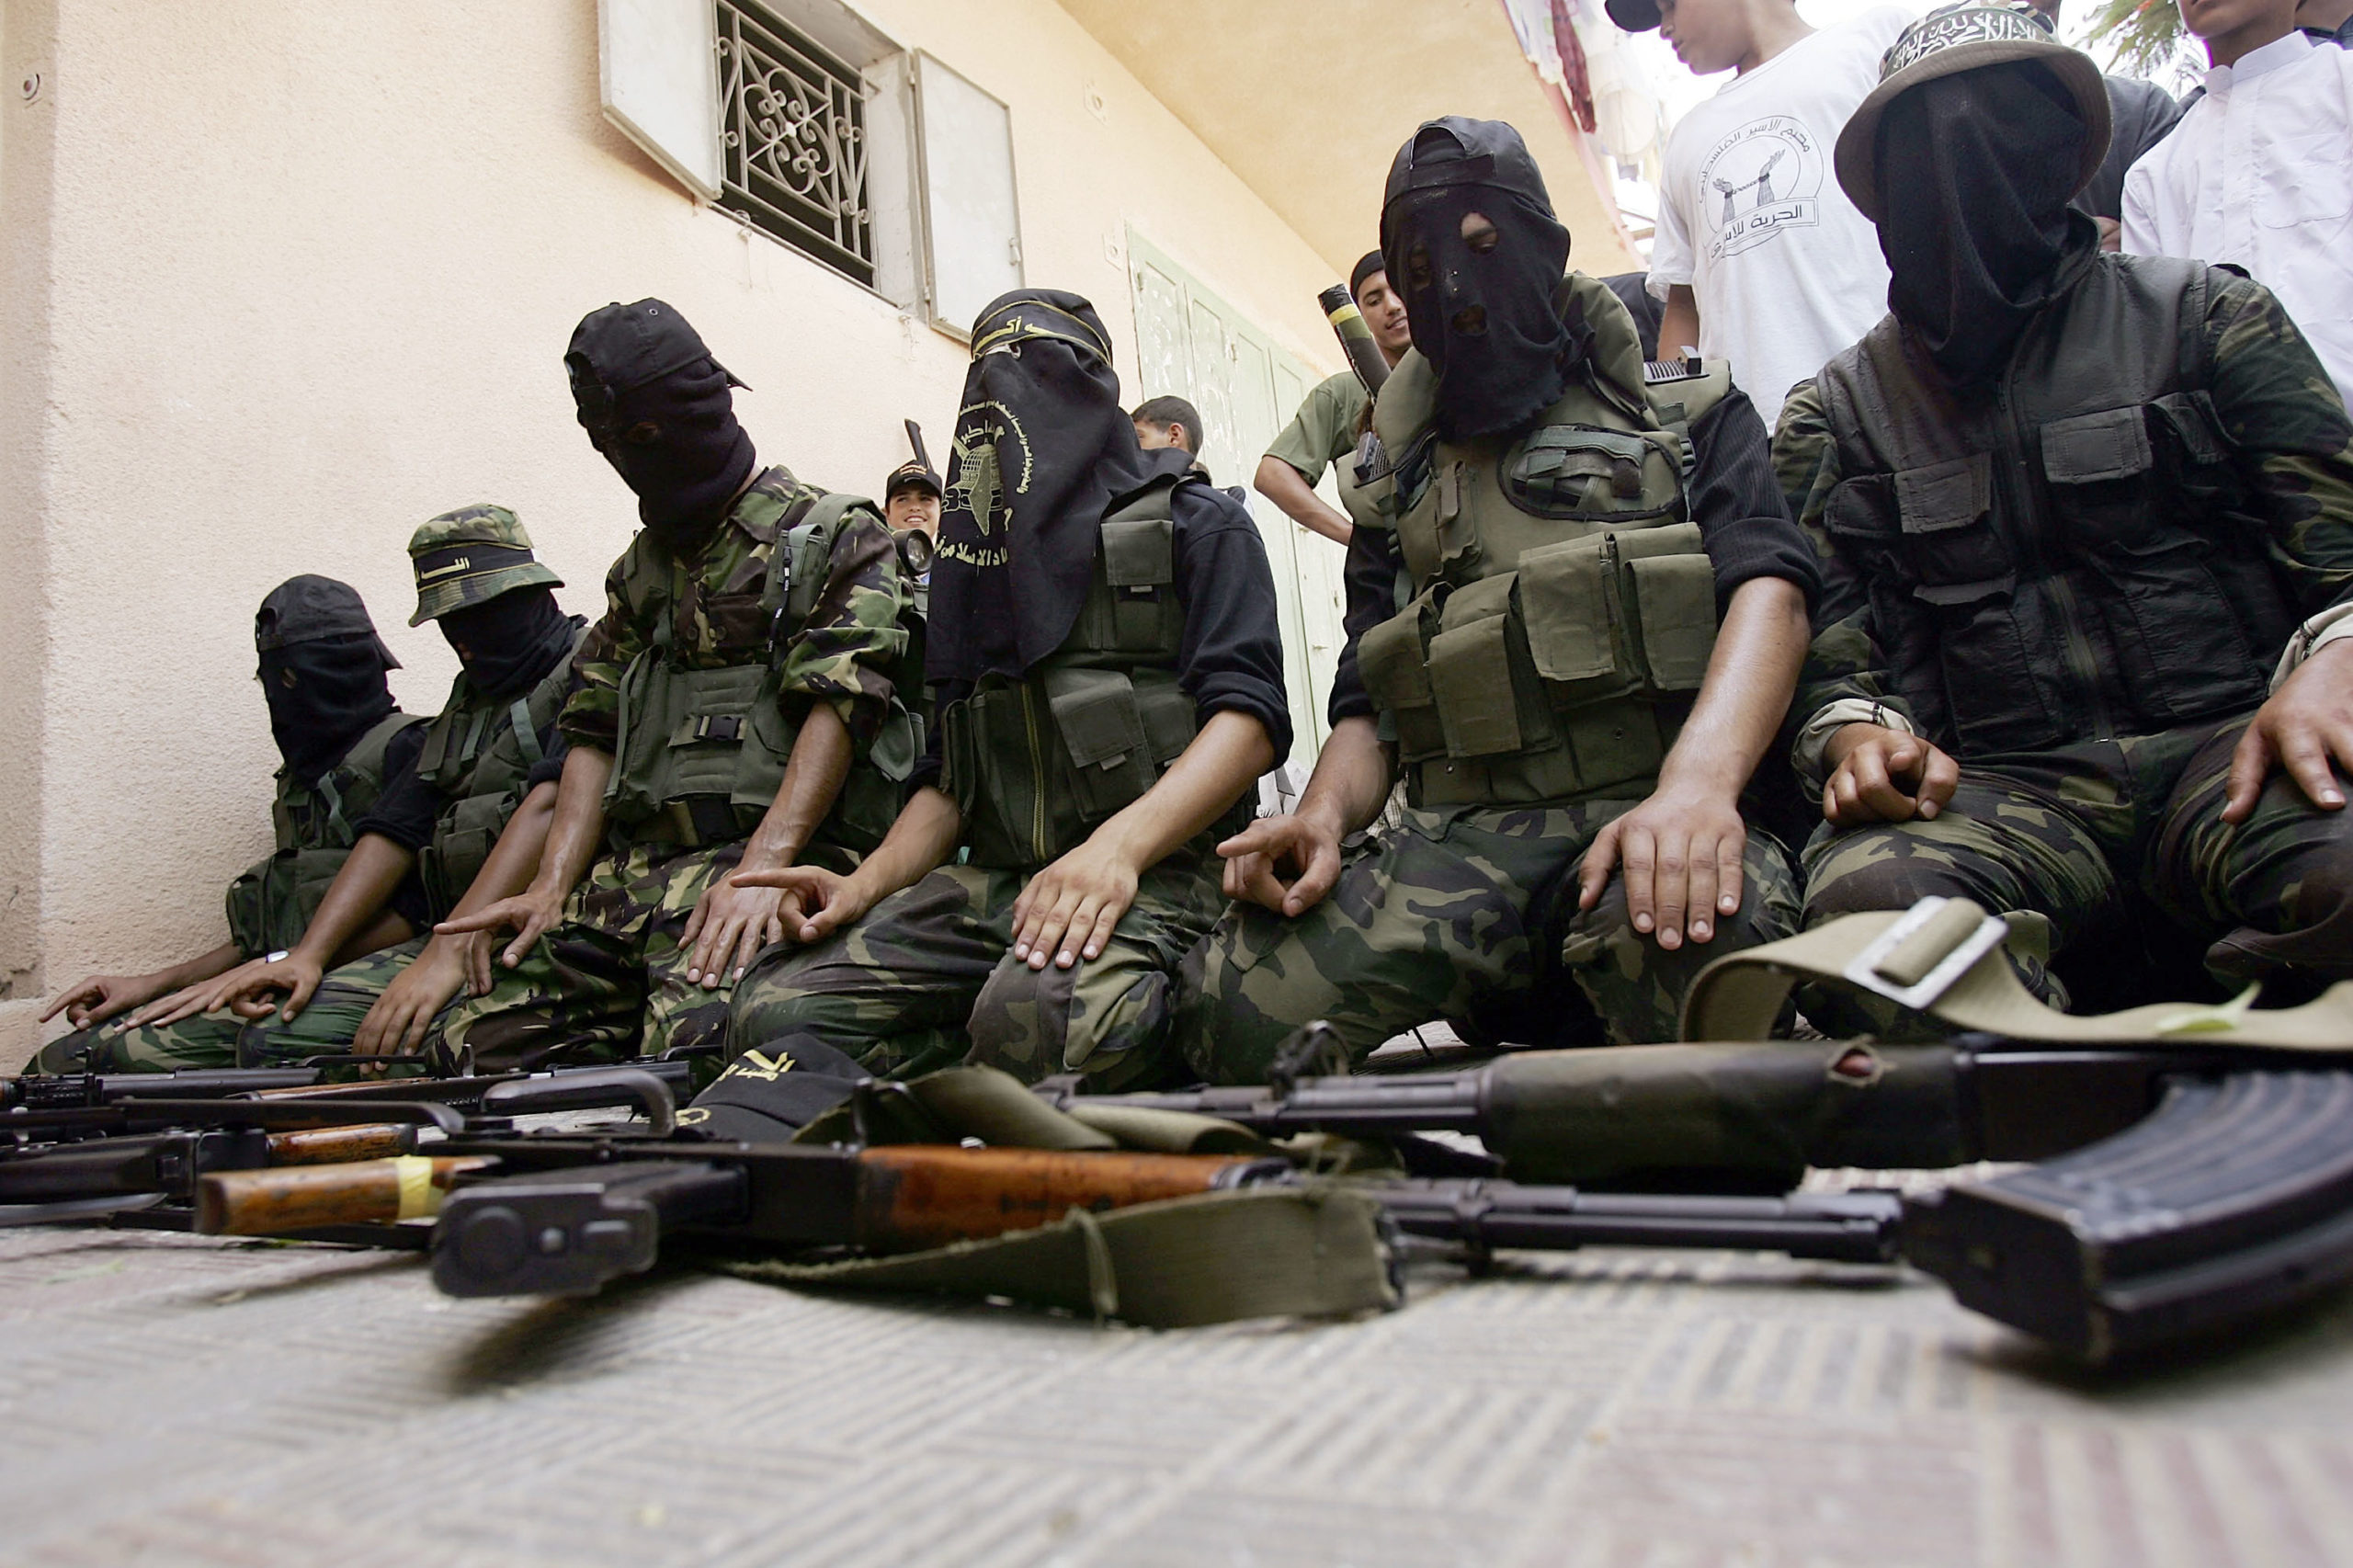 GAZA CITY, GAZA STRIP - AUGUST 12: Members of the controversial Palestinian group Islamic Jihad display weapons while praying before walking through the streets in a march with supporters August 12, 2005 Gaza City, the Gaza Strip. As Israel prepares for a pullout of settlements in both Gaza and the West Bank, various Palestinian groups are vying for power in the post settlement Gaza. (Photo by Spencer Platt/Getty Images)